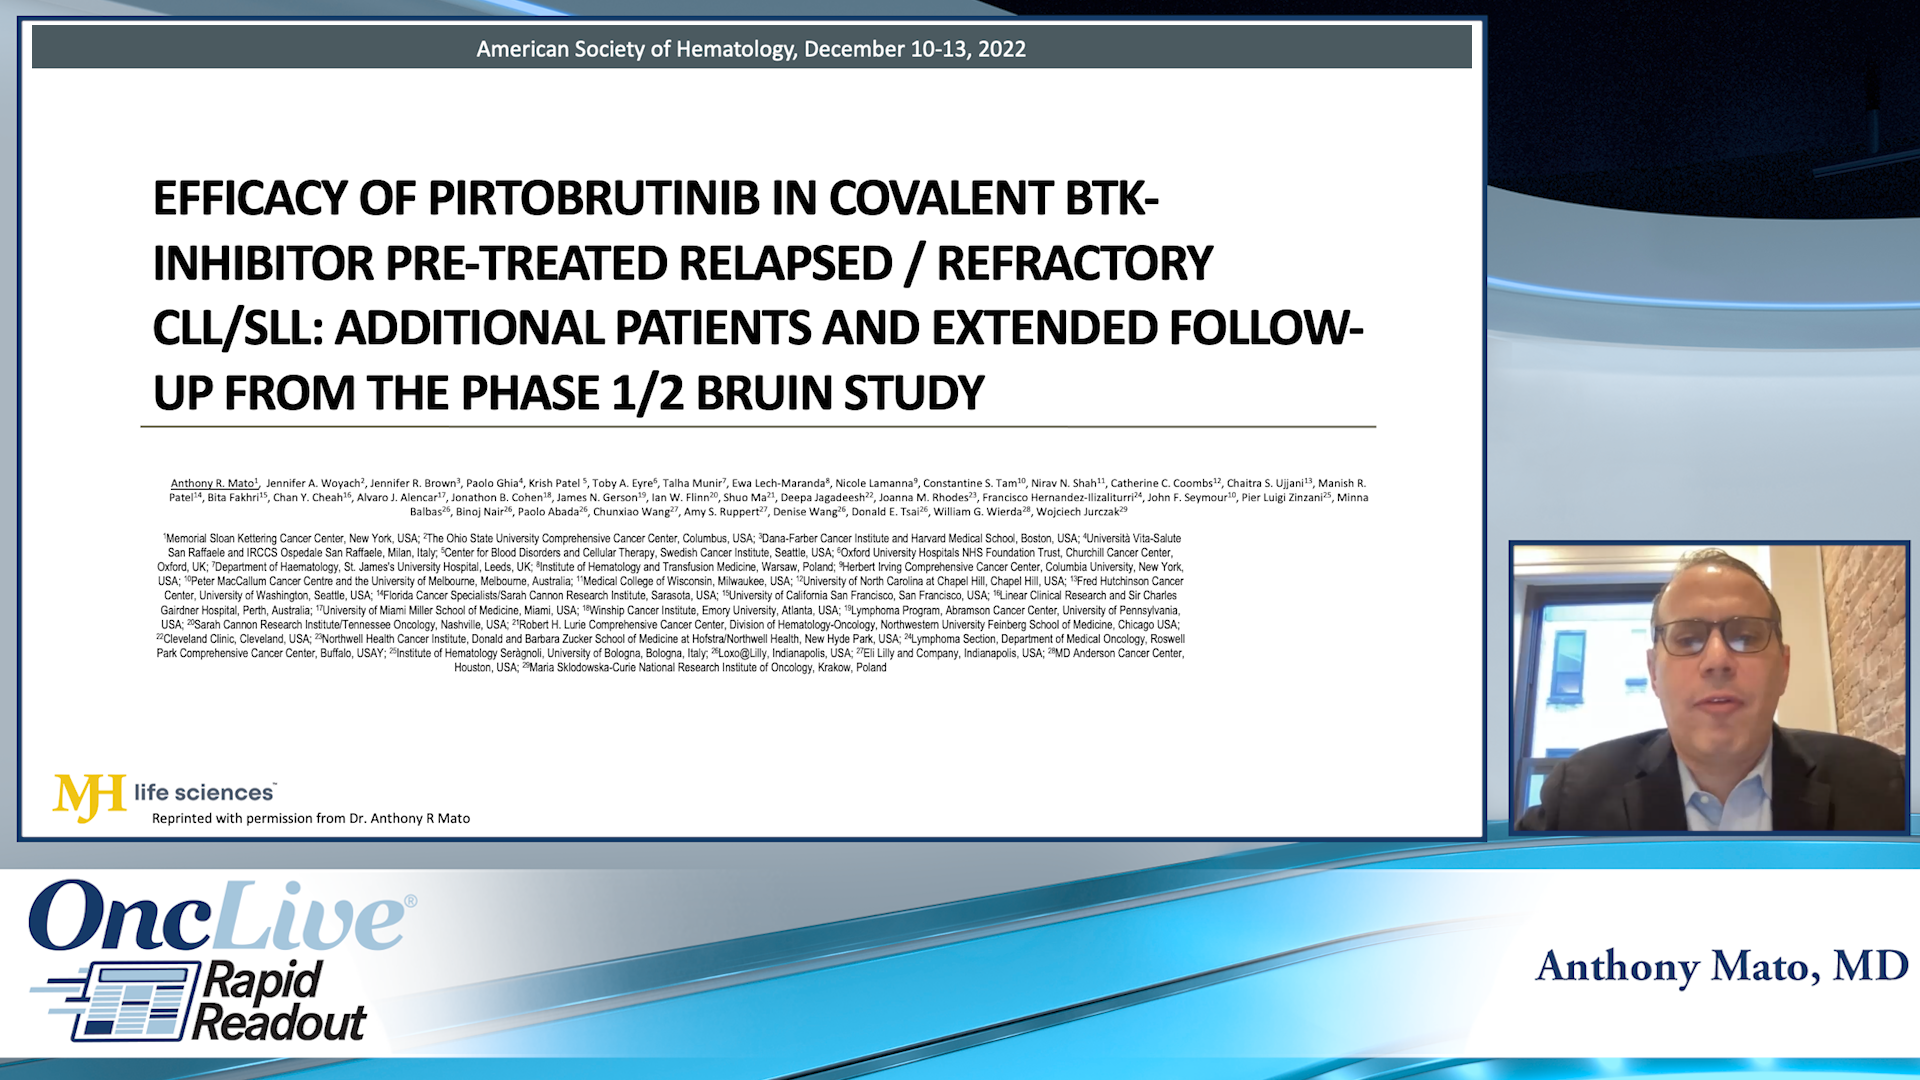 Efficacy of Pirtobrutinib in Covalent BTK-Inhibitor Pre-Treated Relapsed / Refractory CLL/SLL: Additional Patients and Extended Follow-up from the Phase 1/2 BRUIN Study